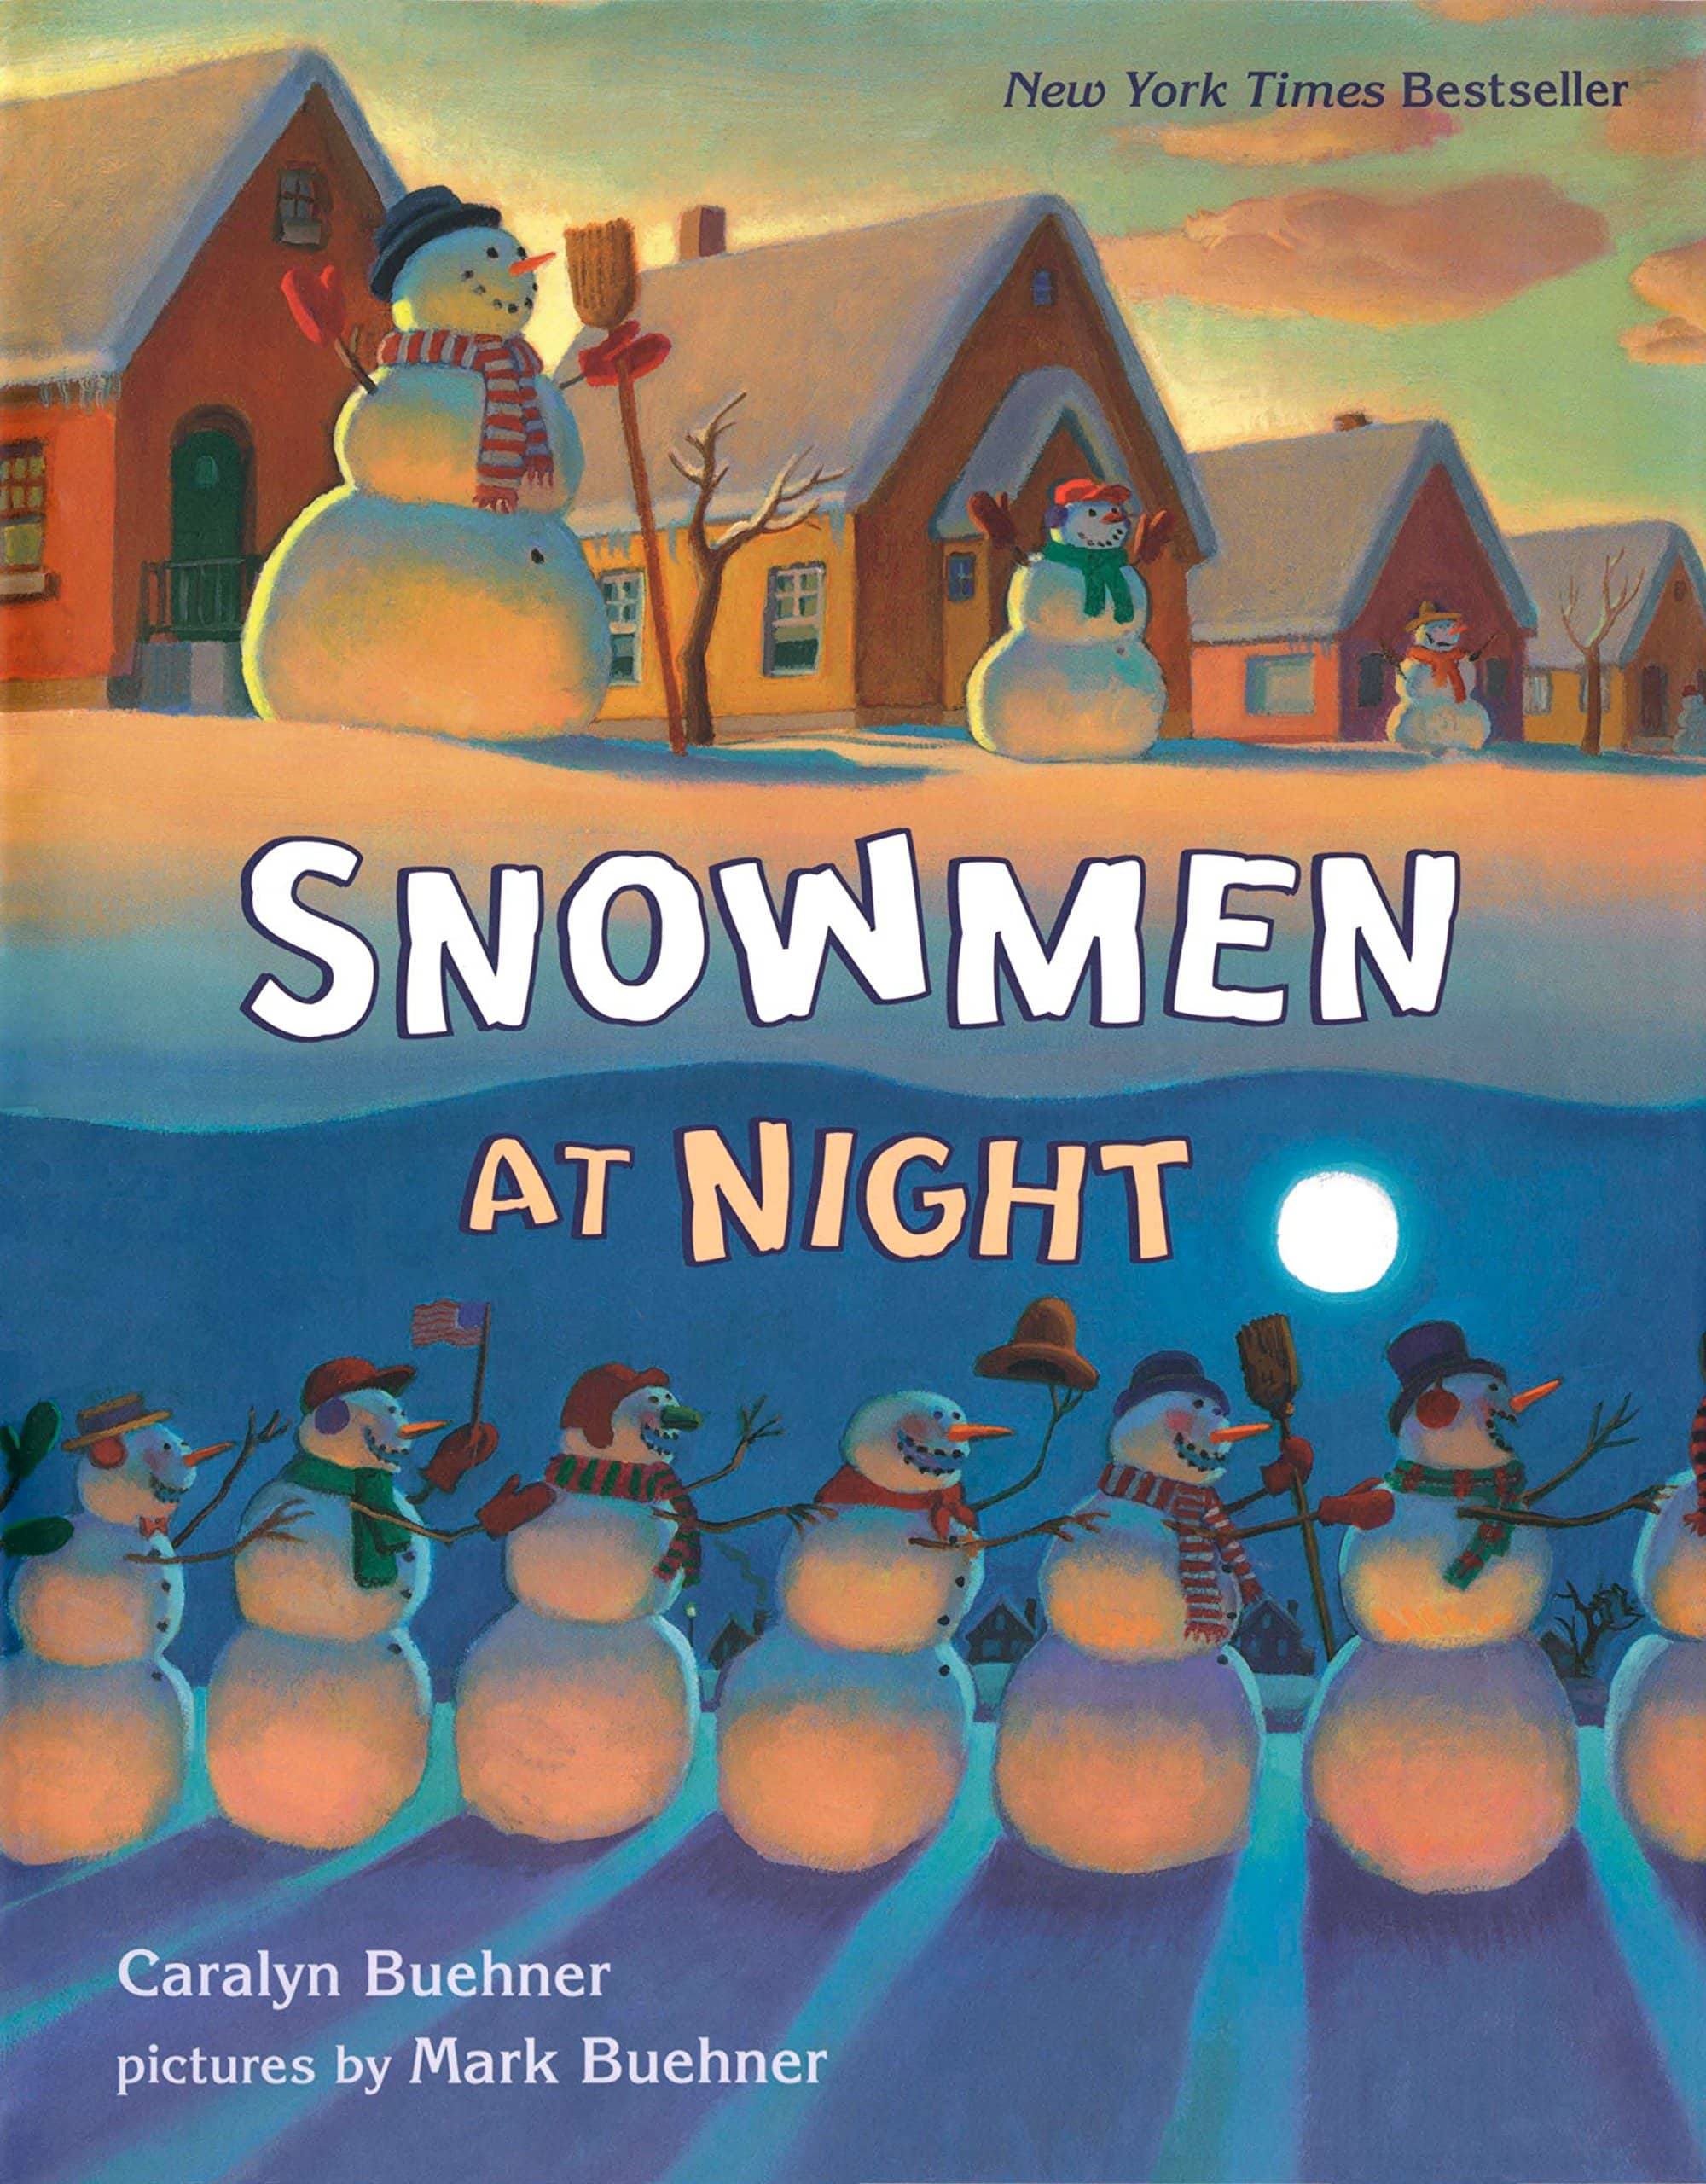 The cover for the book Snowmen at Night